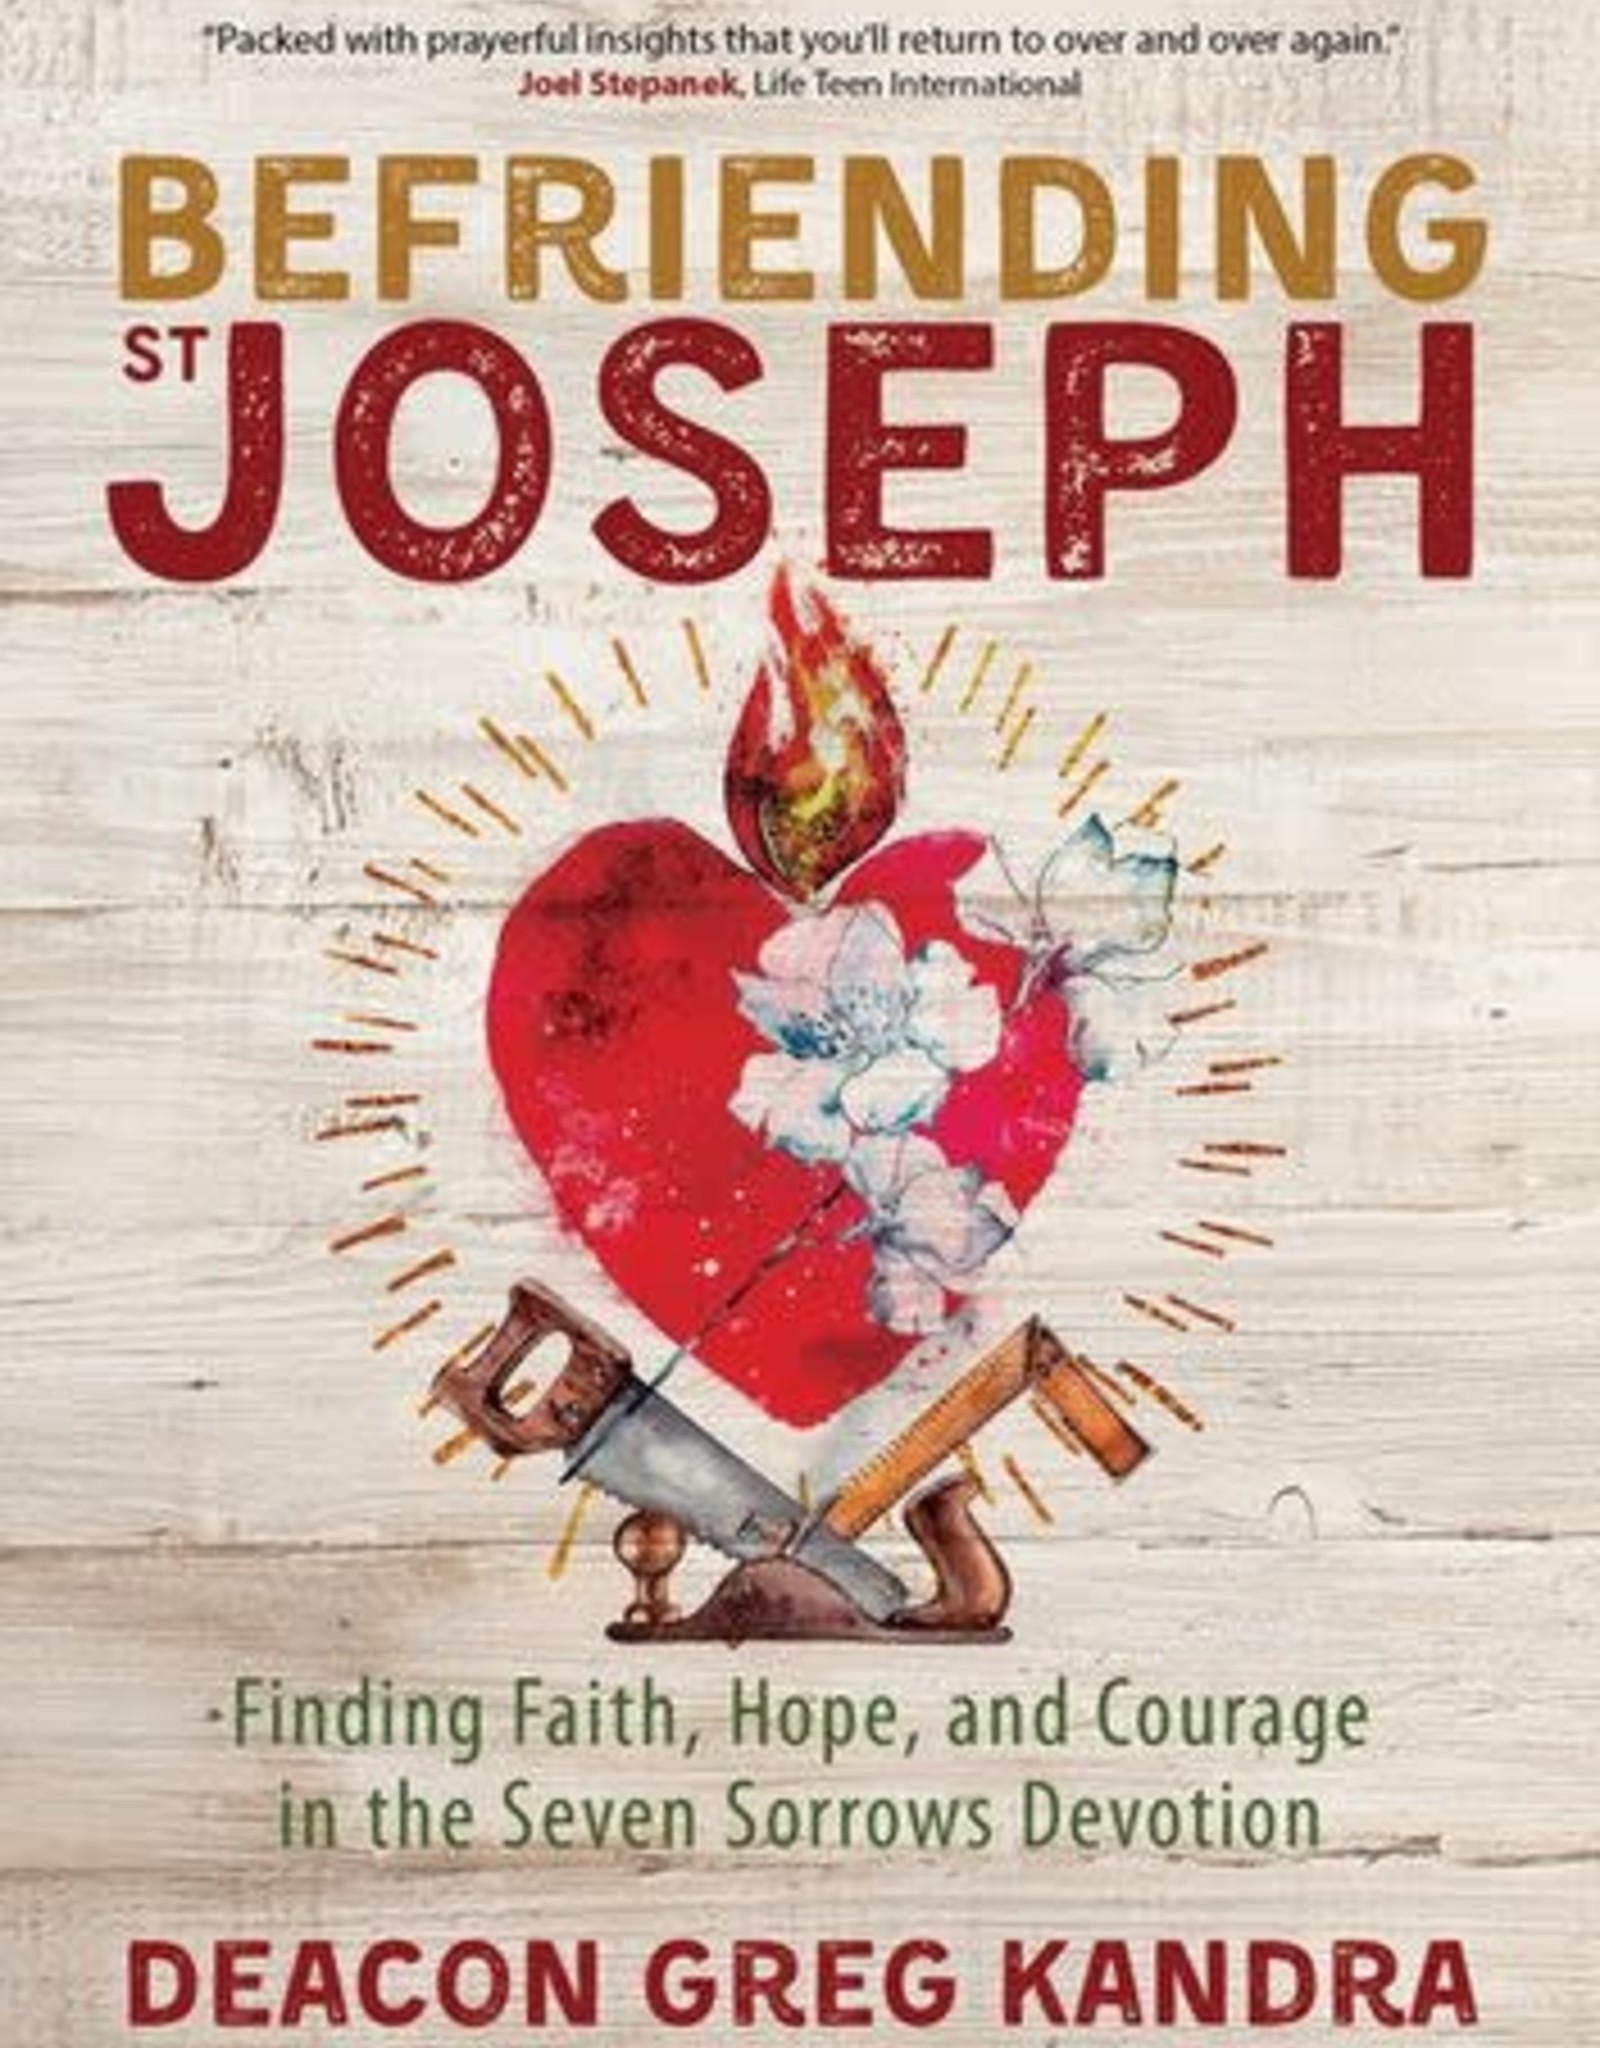 Befriending St. Joseph:  Finding Faith, Hope and Courage in the Seven Sorrows of Devotion, by Greg Kandra (paperback)